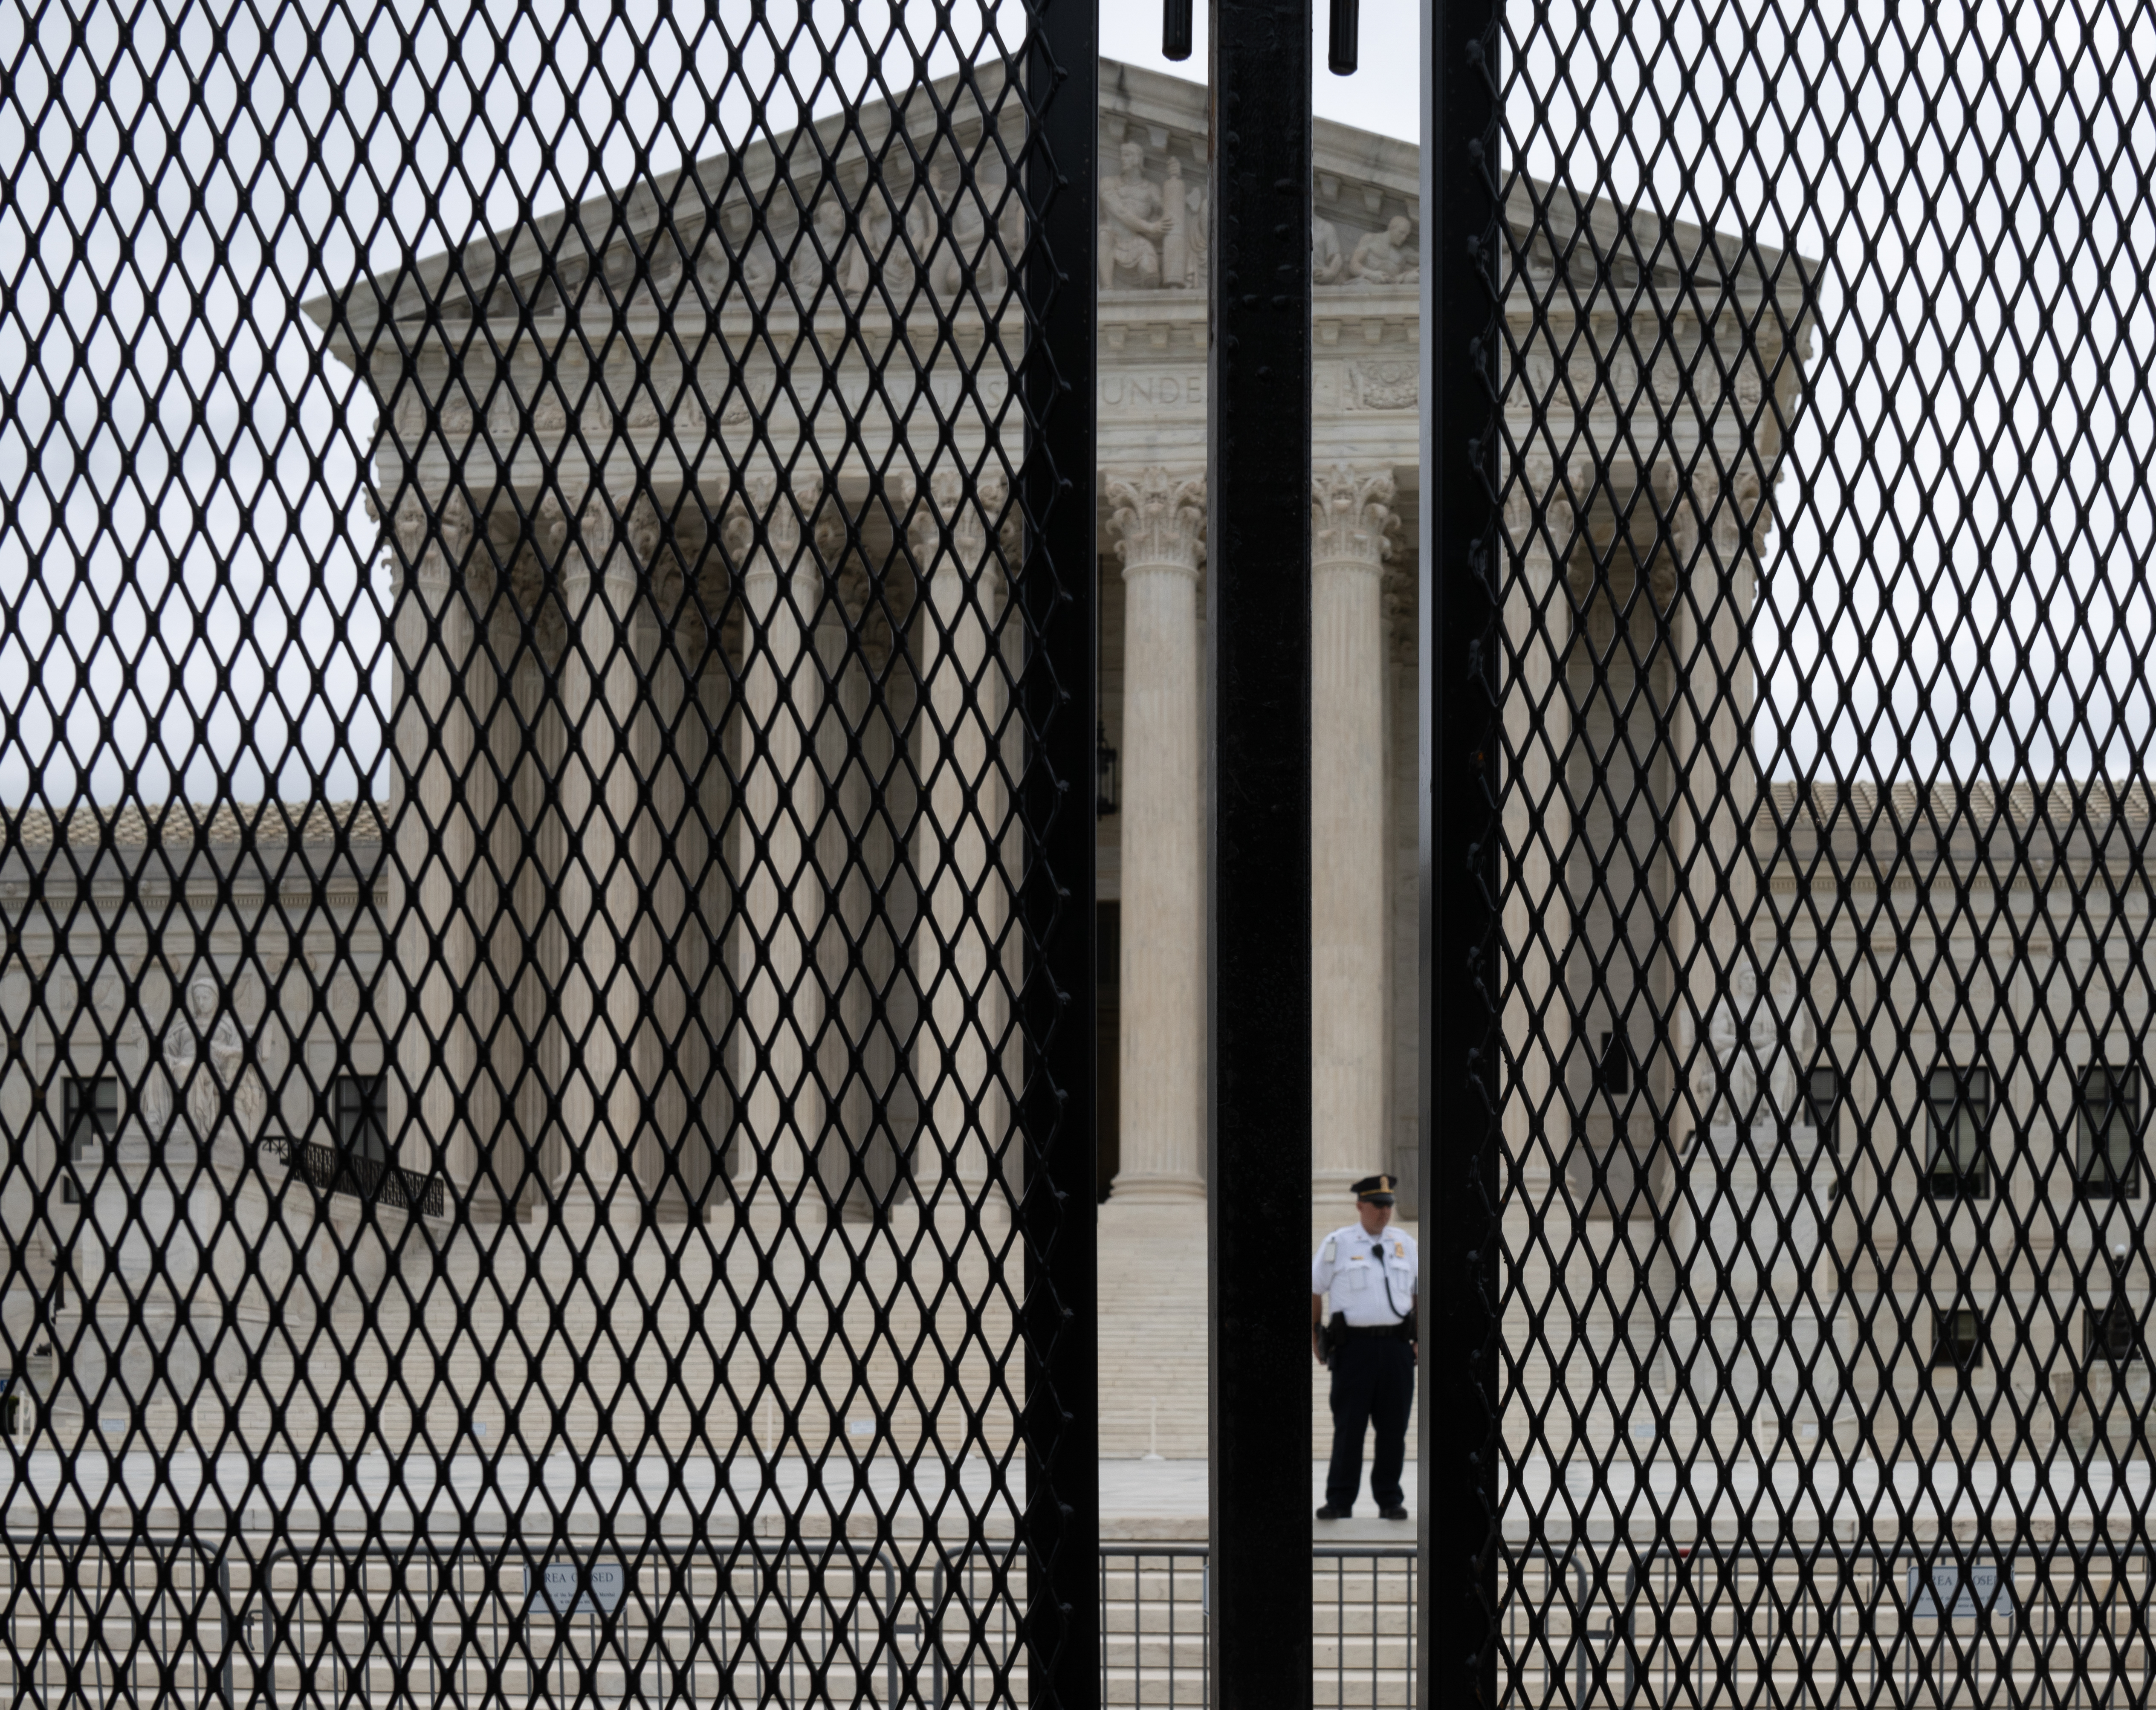 The front of the Supreme Court, a white build with a triangle roof, steps, and columns. A tall black fence sits in front of the building, a security guard is seen through the fence standing at the bottom of the steps to the building.